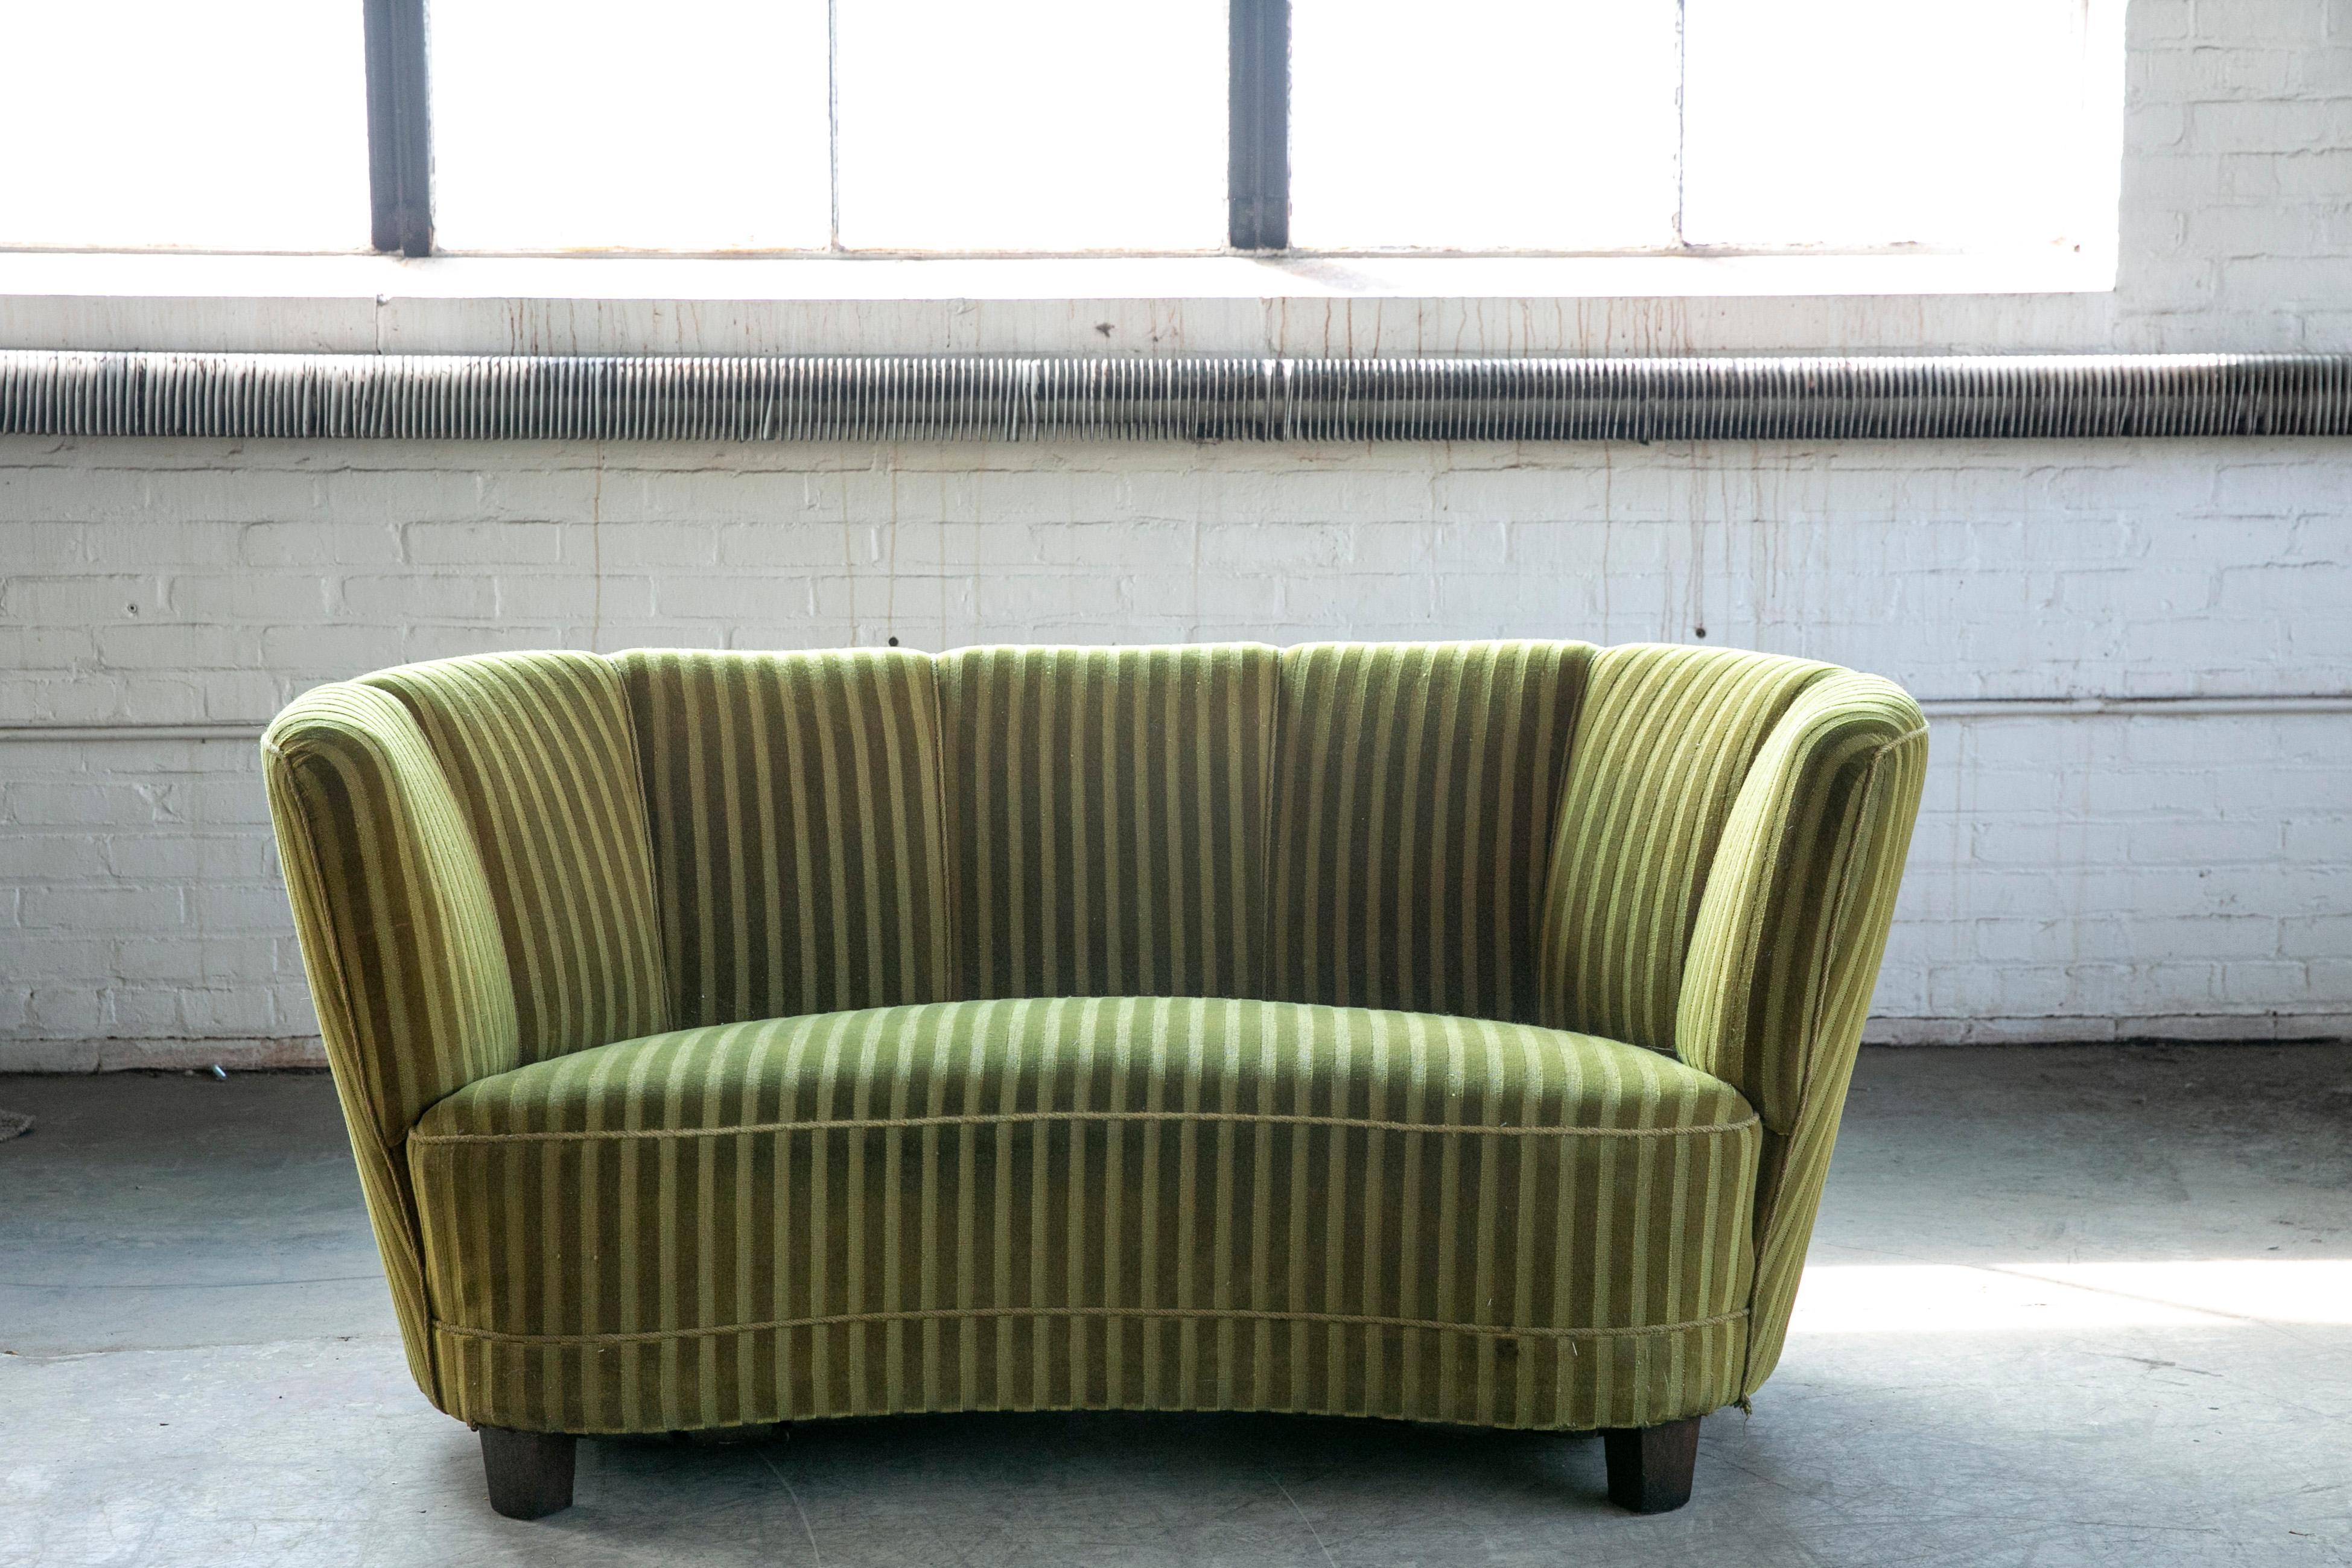 Viggo Boesen style banana shaped or curved Loveseat made in Denmark, around late 1930's or early 1940's. This small sofa will make a strong statement in any room. Beautiful round voluptuous lines and solid square legs. The charming original striped